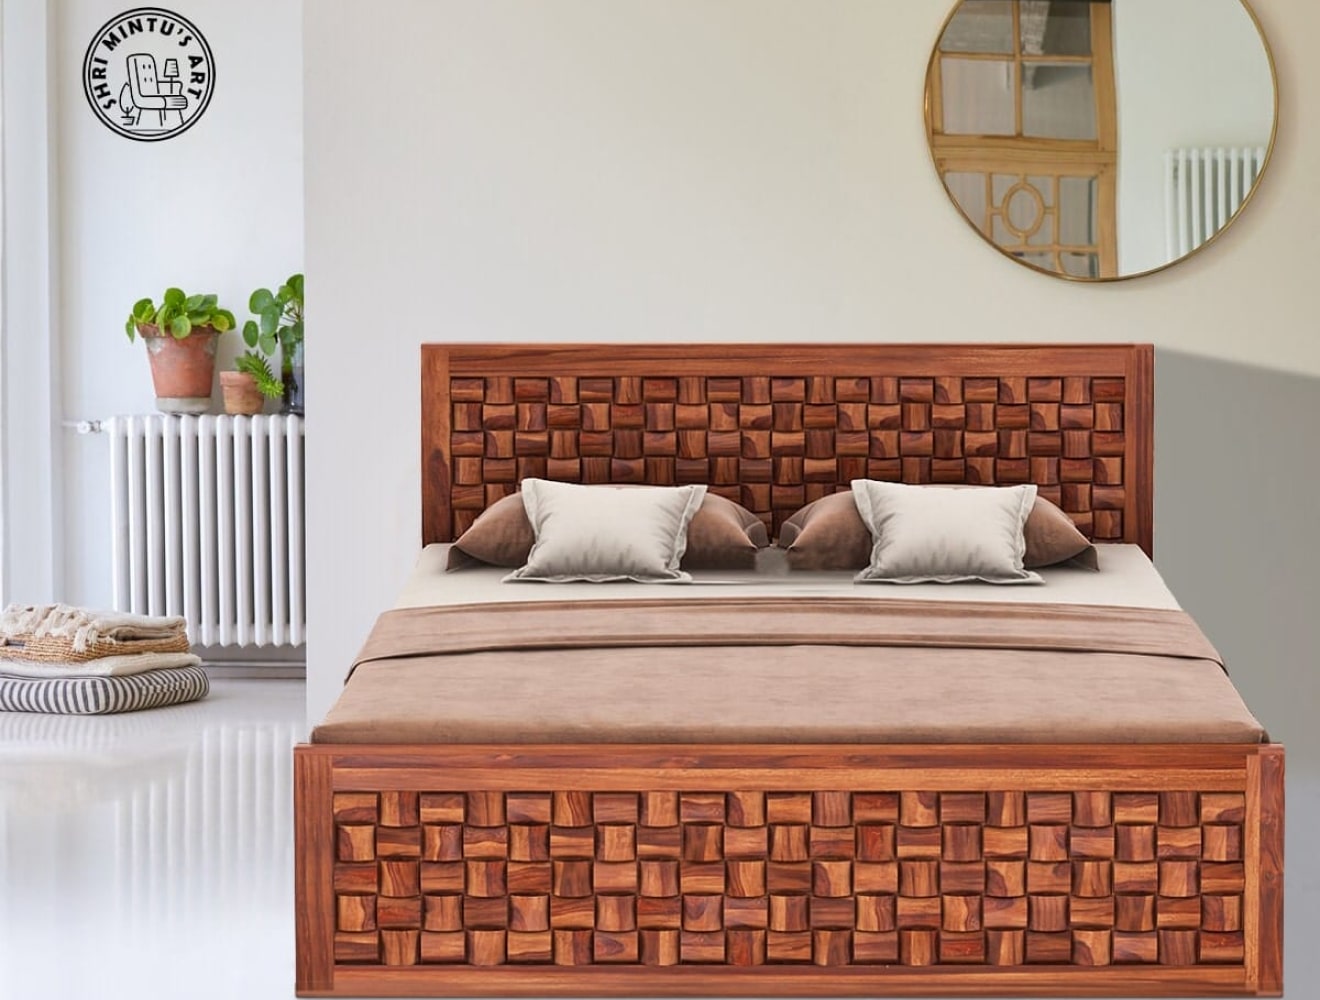 What-Are-Some-Popular-Styles-of-Wooden-Furniture-Designs